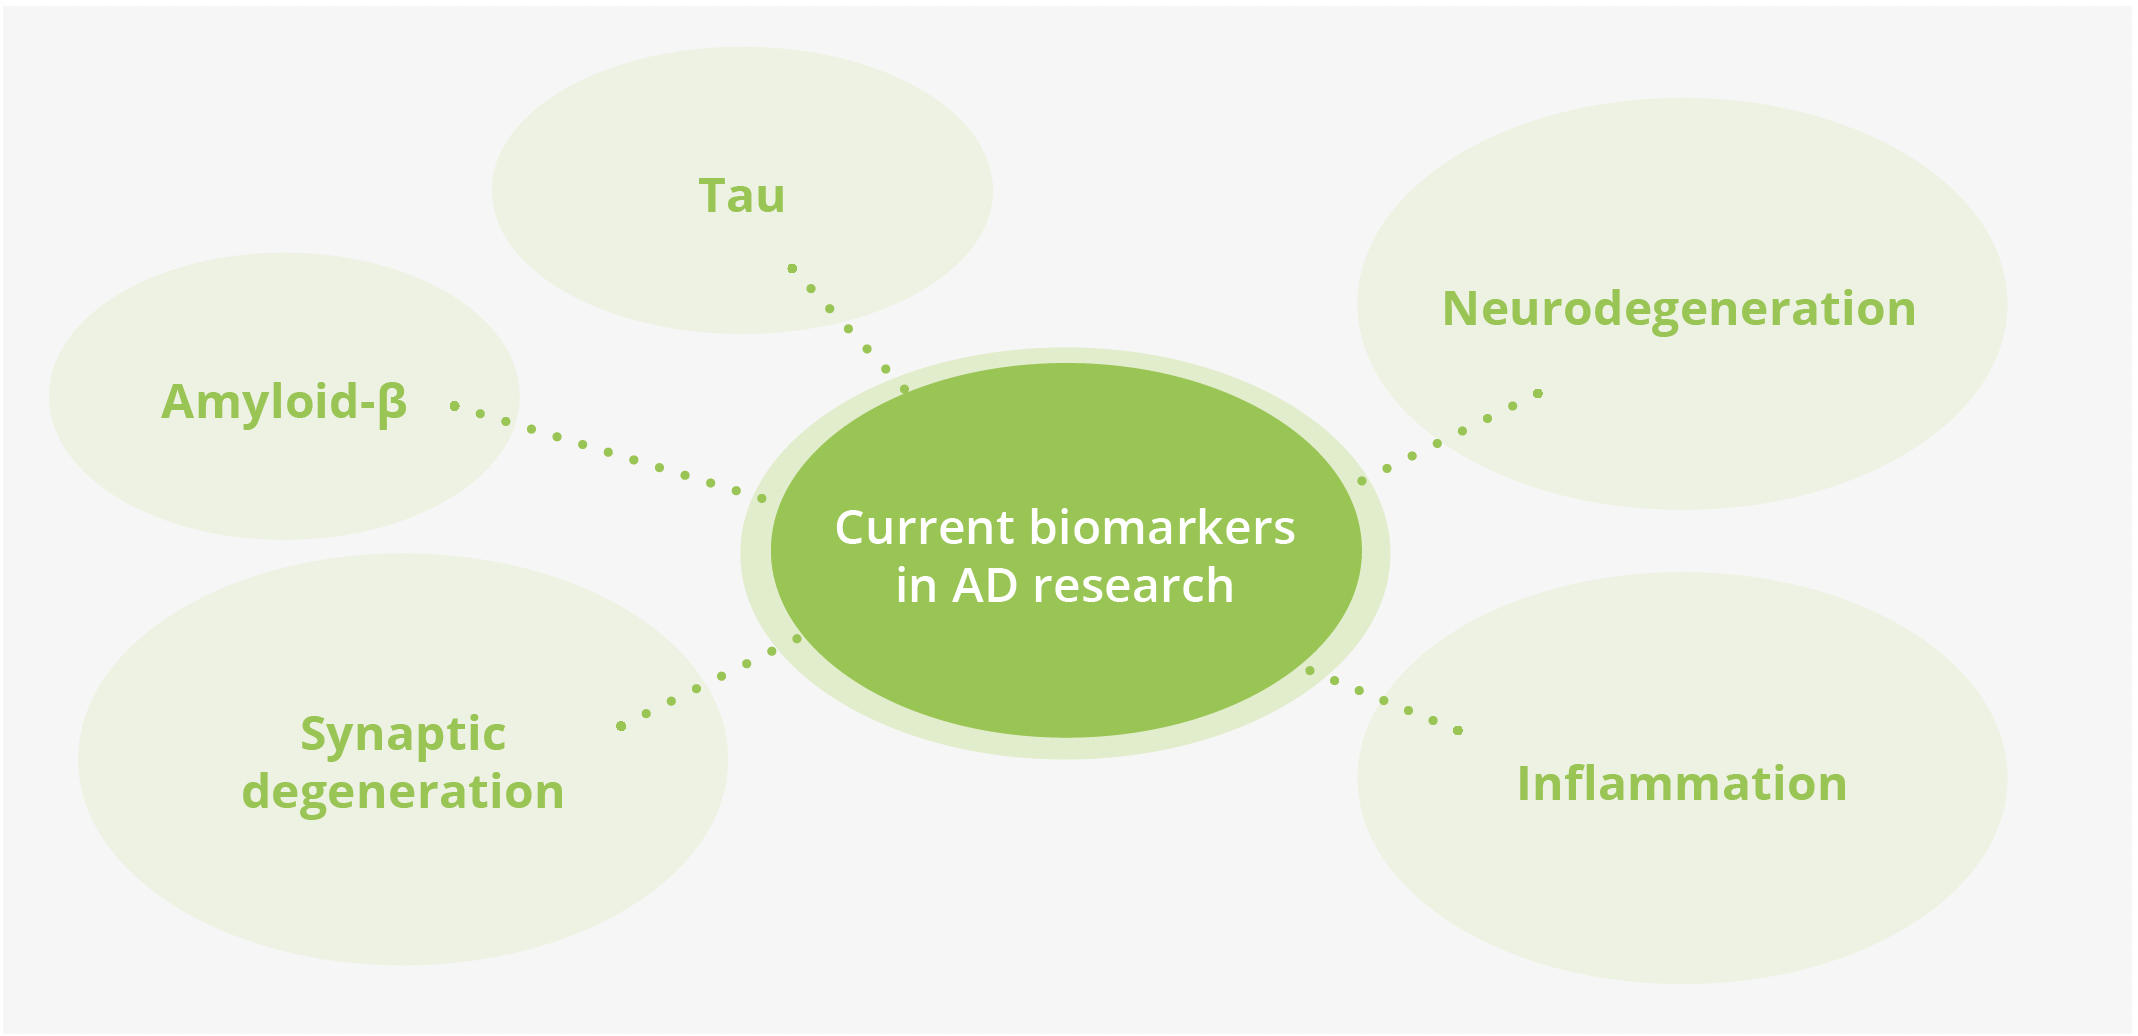 Current biomarkers in AD research include tau, amyloid-beta, neurodegeneration, synaptic degeneration and inflammation